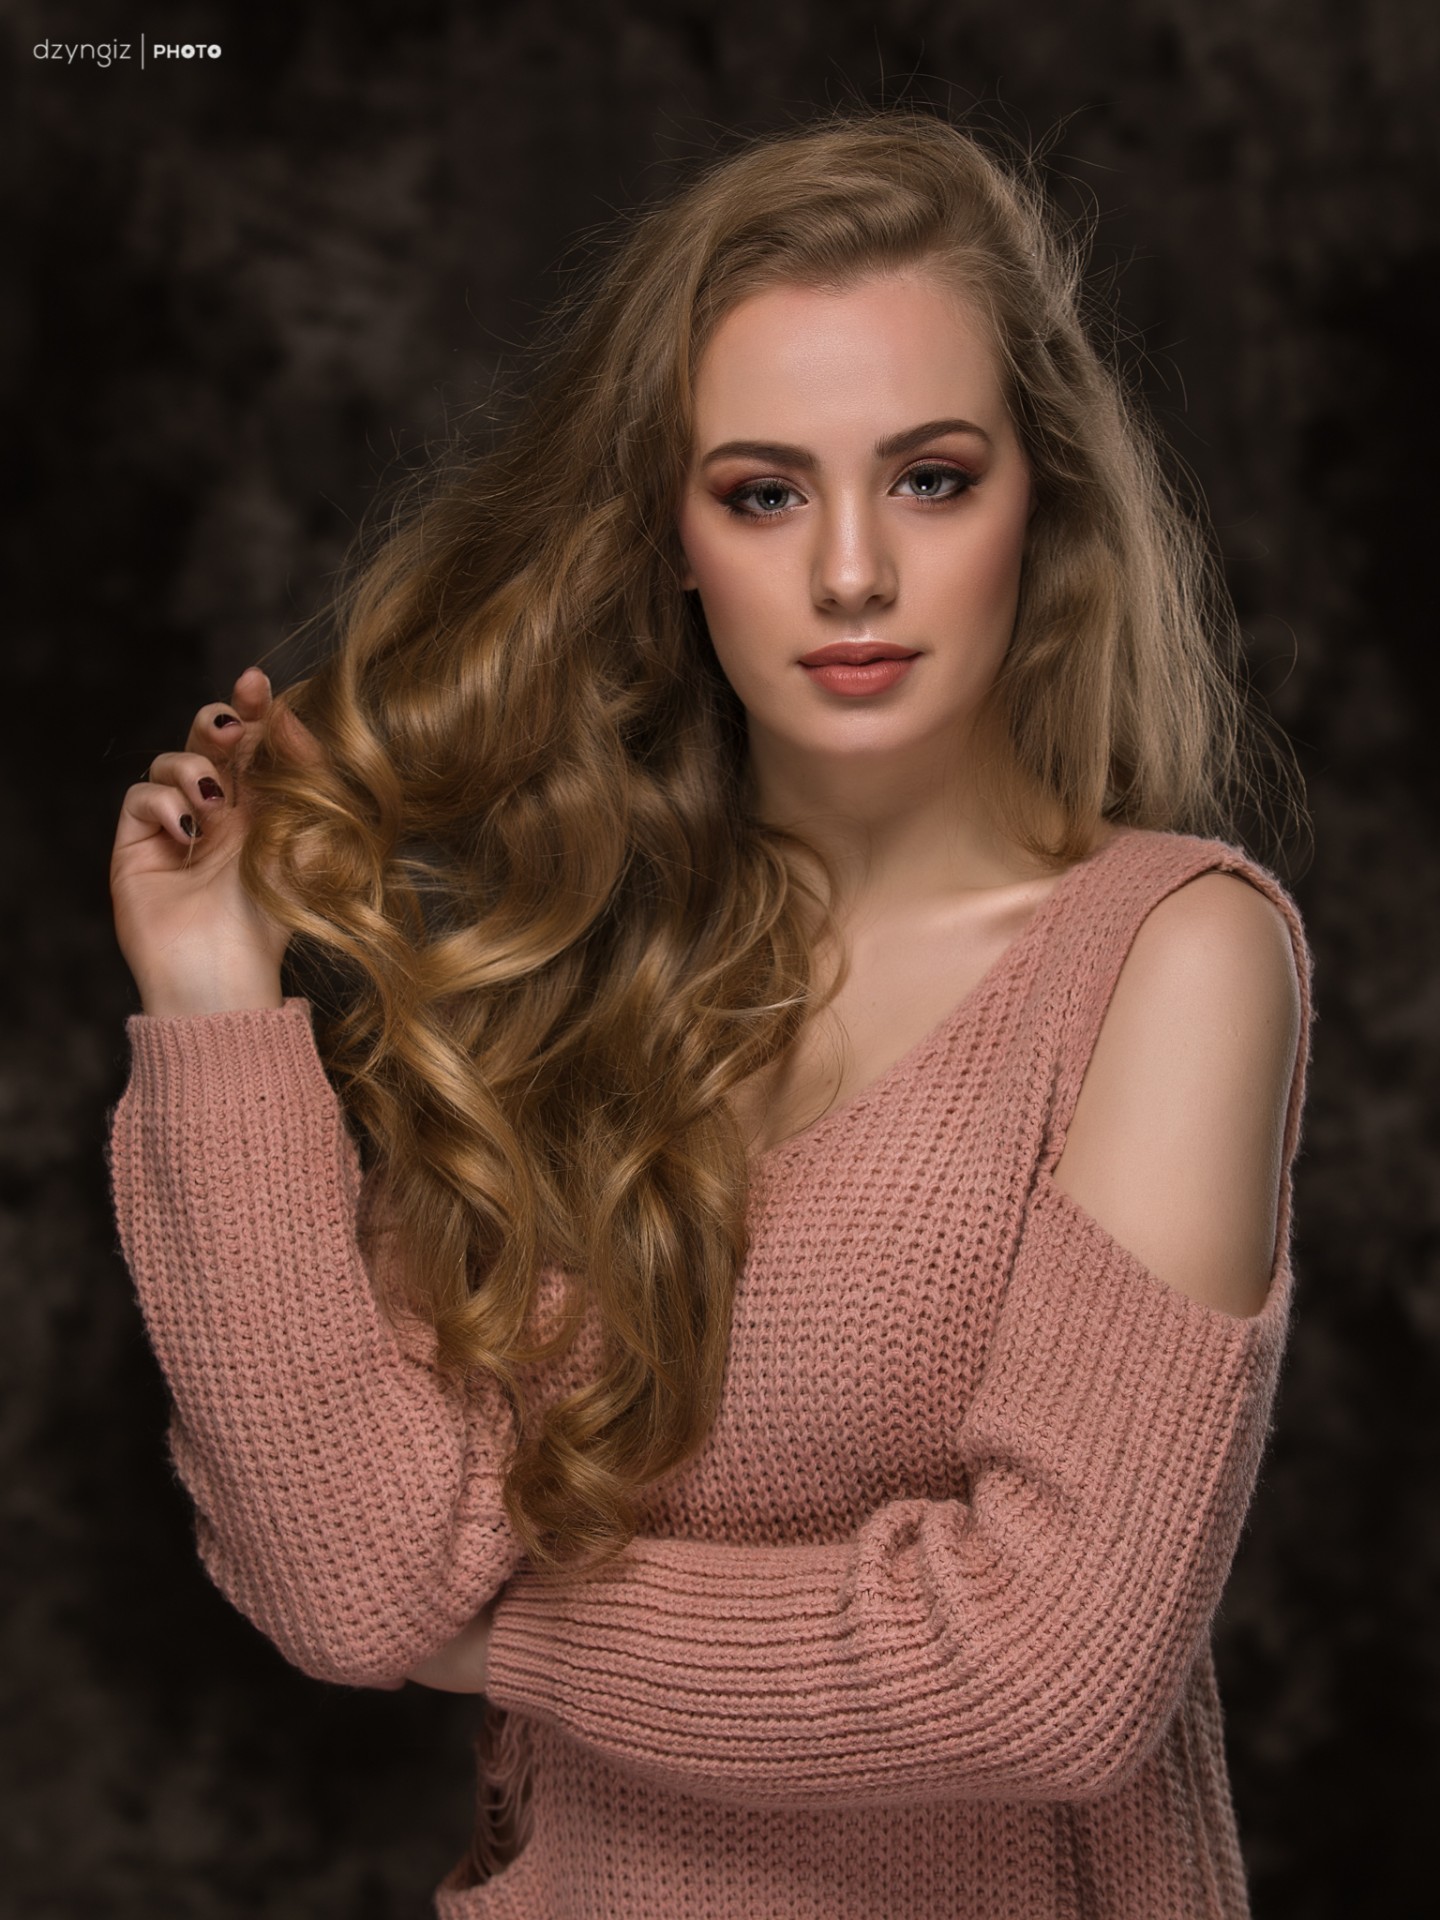 People 1440x1920 women model blonde long hair Tomasz Stankiewicz portrait display sweater painted nails face holding hair portrait pink sweater curly hair pink clothing